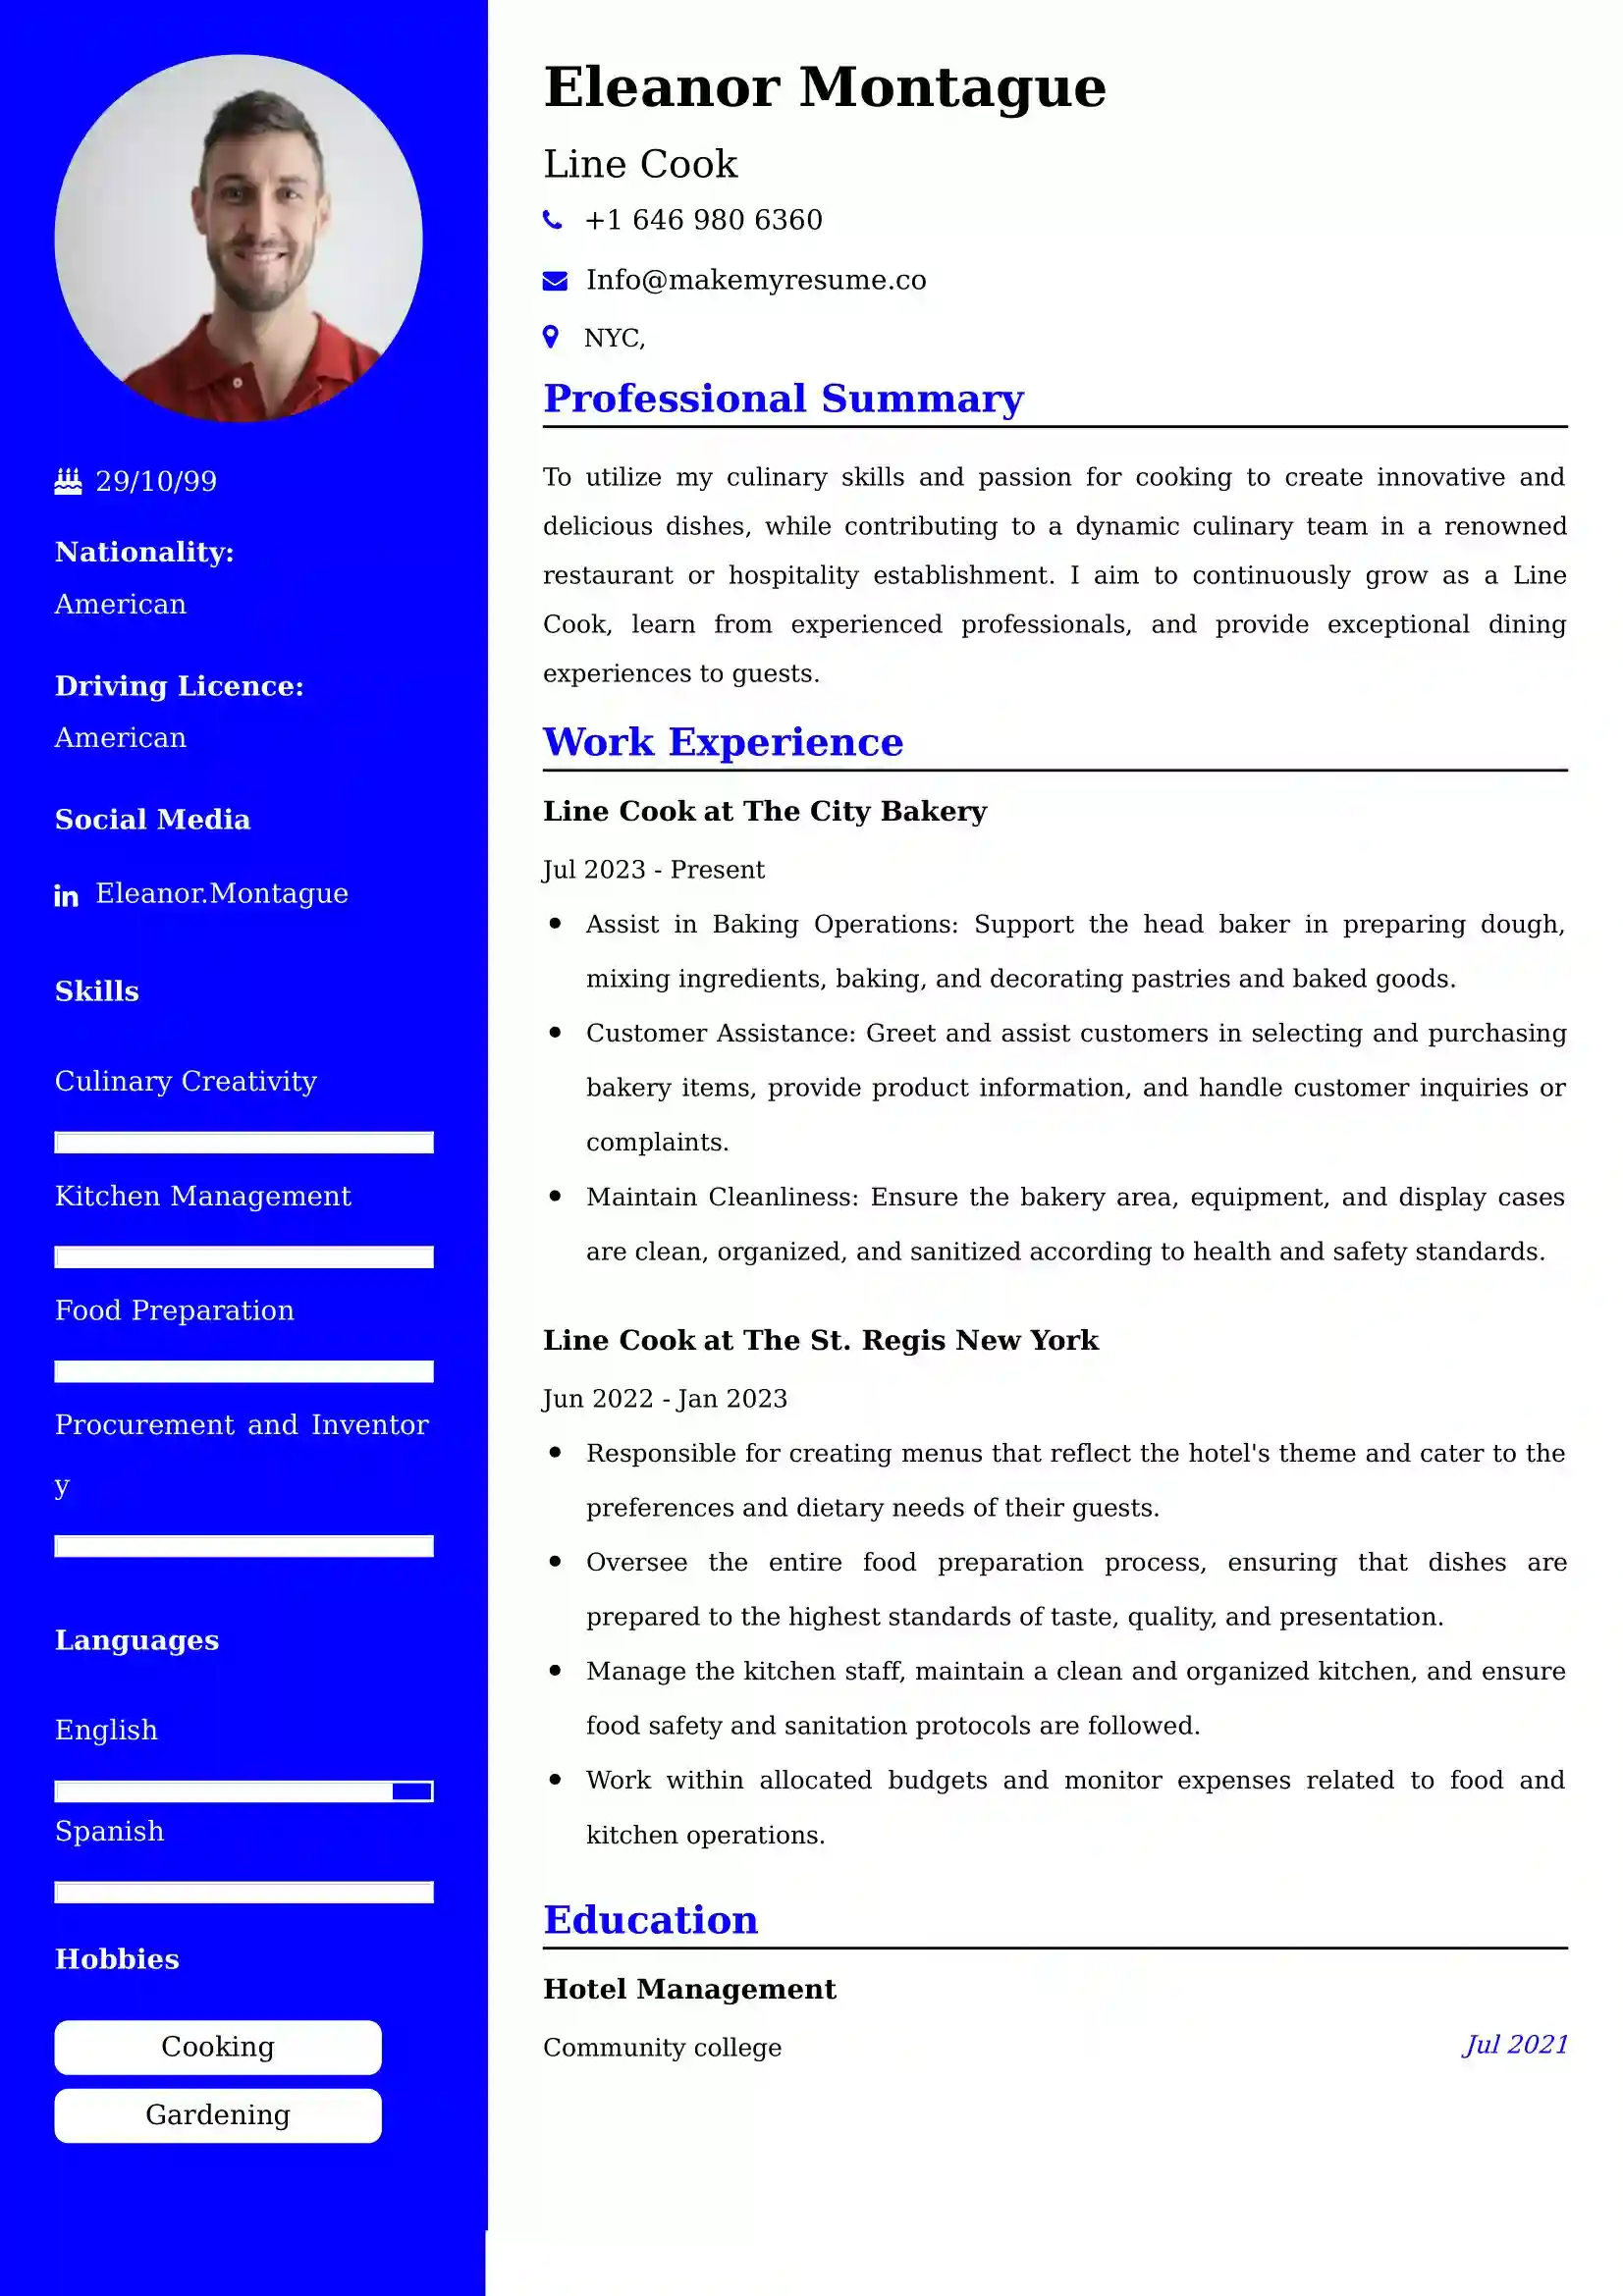 Line Cook Resume Examples - UK Format, Latest Template.